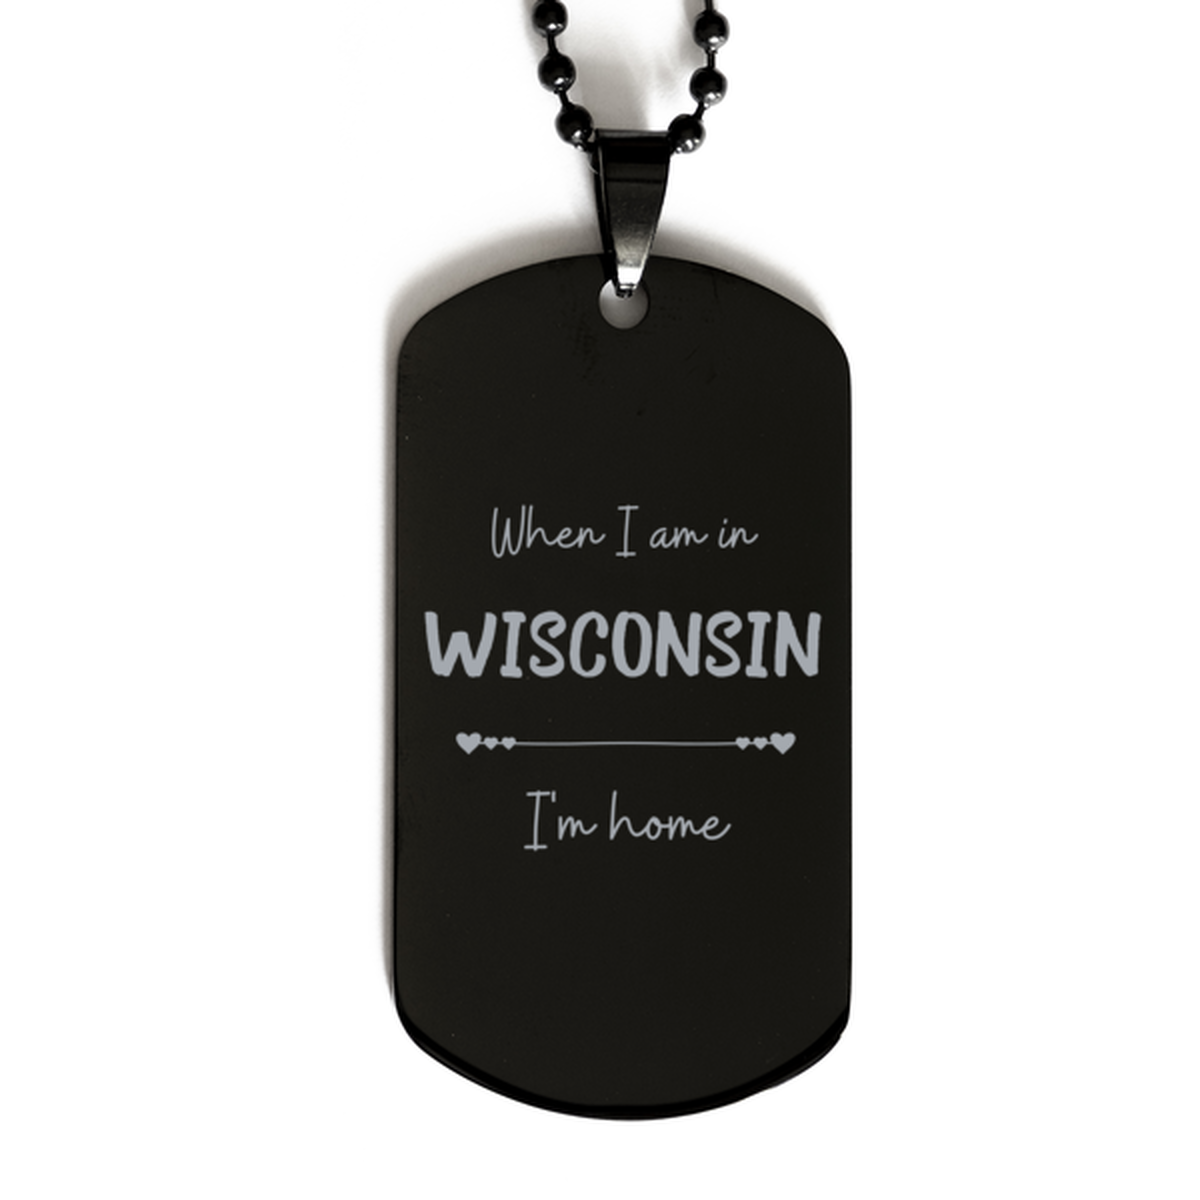 When I am in Wisconsin I'm home Black Dog Tag, Cheap Gifts For Wisconsin, State Wisconsin Birthday Gifts for Friends Coworker